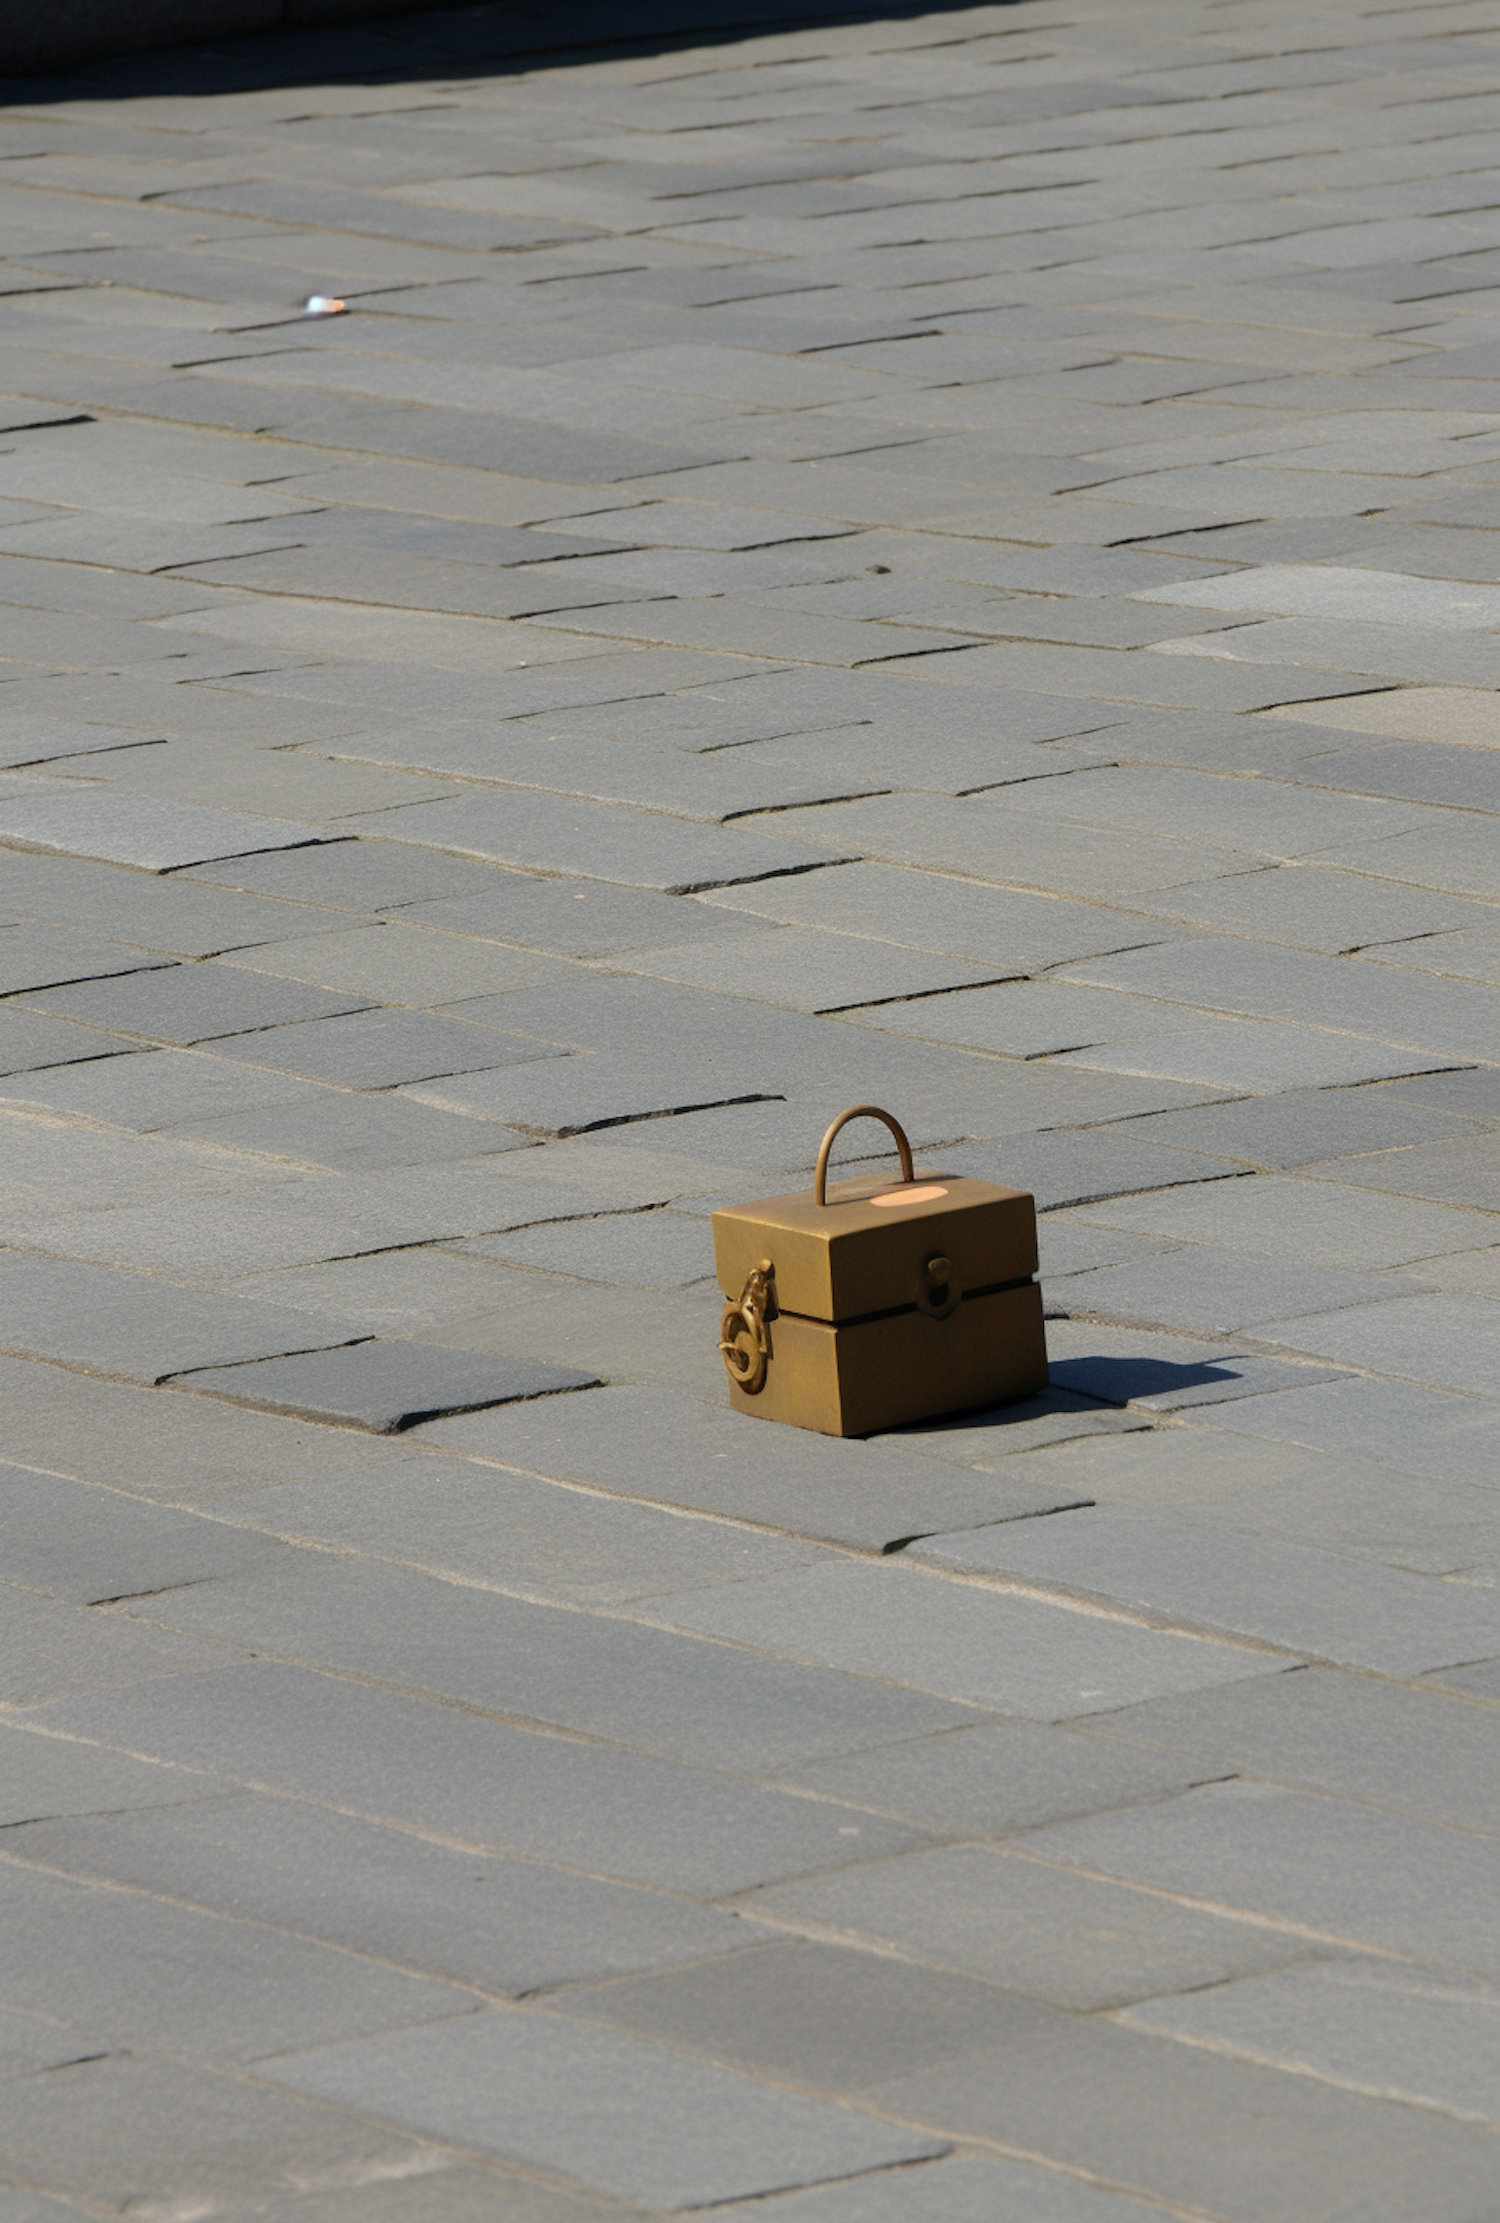 Solitary Sunlit Briefcase